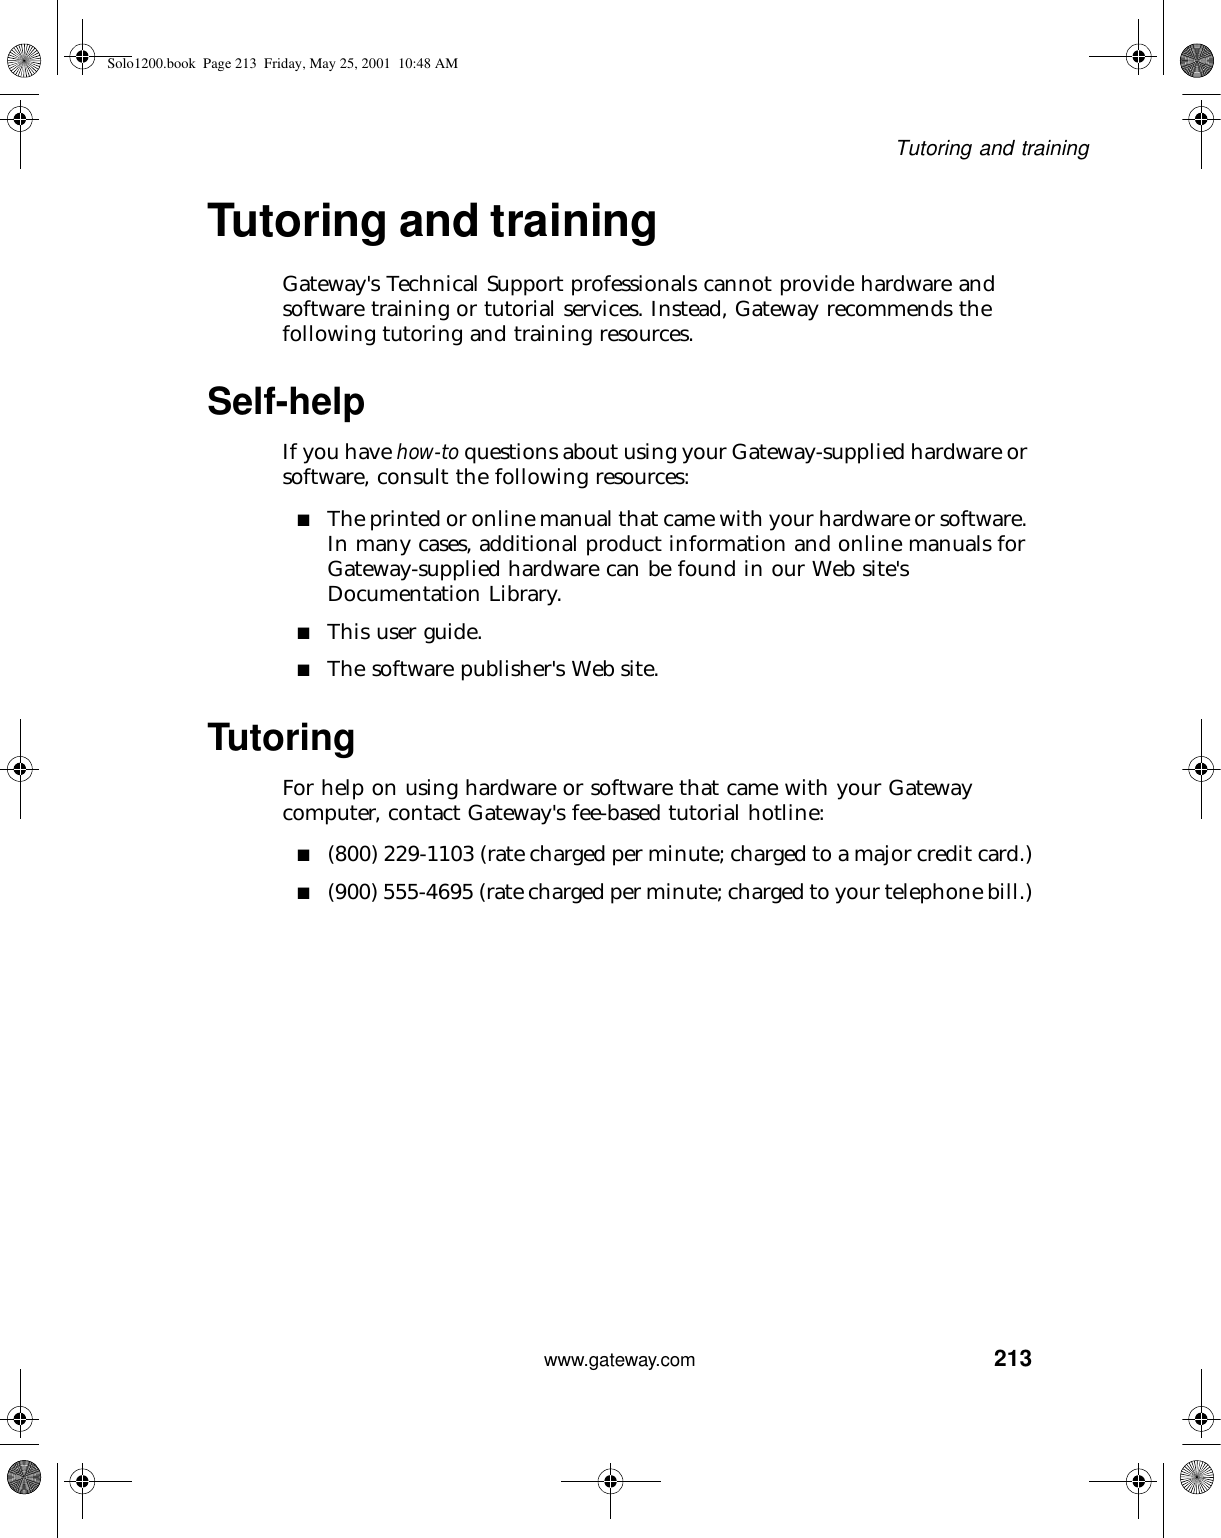 213Tutoring and trainingwww.gateway.comTutoring and trainingGateway&apos;s Technical Support professionals cannot provide hardware and software training or tutorial services. Instead, Gateway recommends the following tutoring and training resources.Self-helpIf you have how-to questions about using your Gateway-supplied hardware or software, consult the following resources:■The printed or online manual that came with your hardware or software. In many cases, additional product information and online manuals for Gateway-supplied hardware can be found in our Web site&apos;s Documentation Library.■This user guide.■The software publisher&apos;s Web site.TutoringFor help on using hardware or software that came with your Gateway computer, contact Gateway&apos;s fee-based tutorial hotline:■(800) 229-1103 (rate charged per minute; charged to a major credit card.)■(900) 555-4695 (rate charged per minute; charged to your telephone bill.)Solo1200.book Page 213 Friday, May 25, 2001 10:48 AM